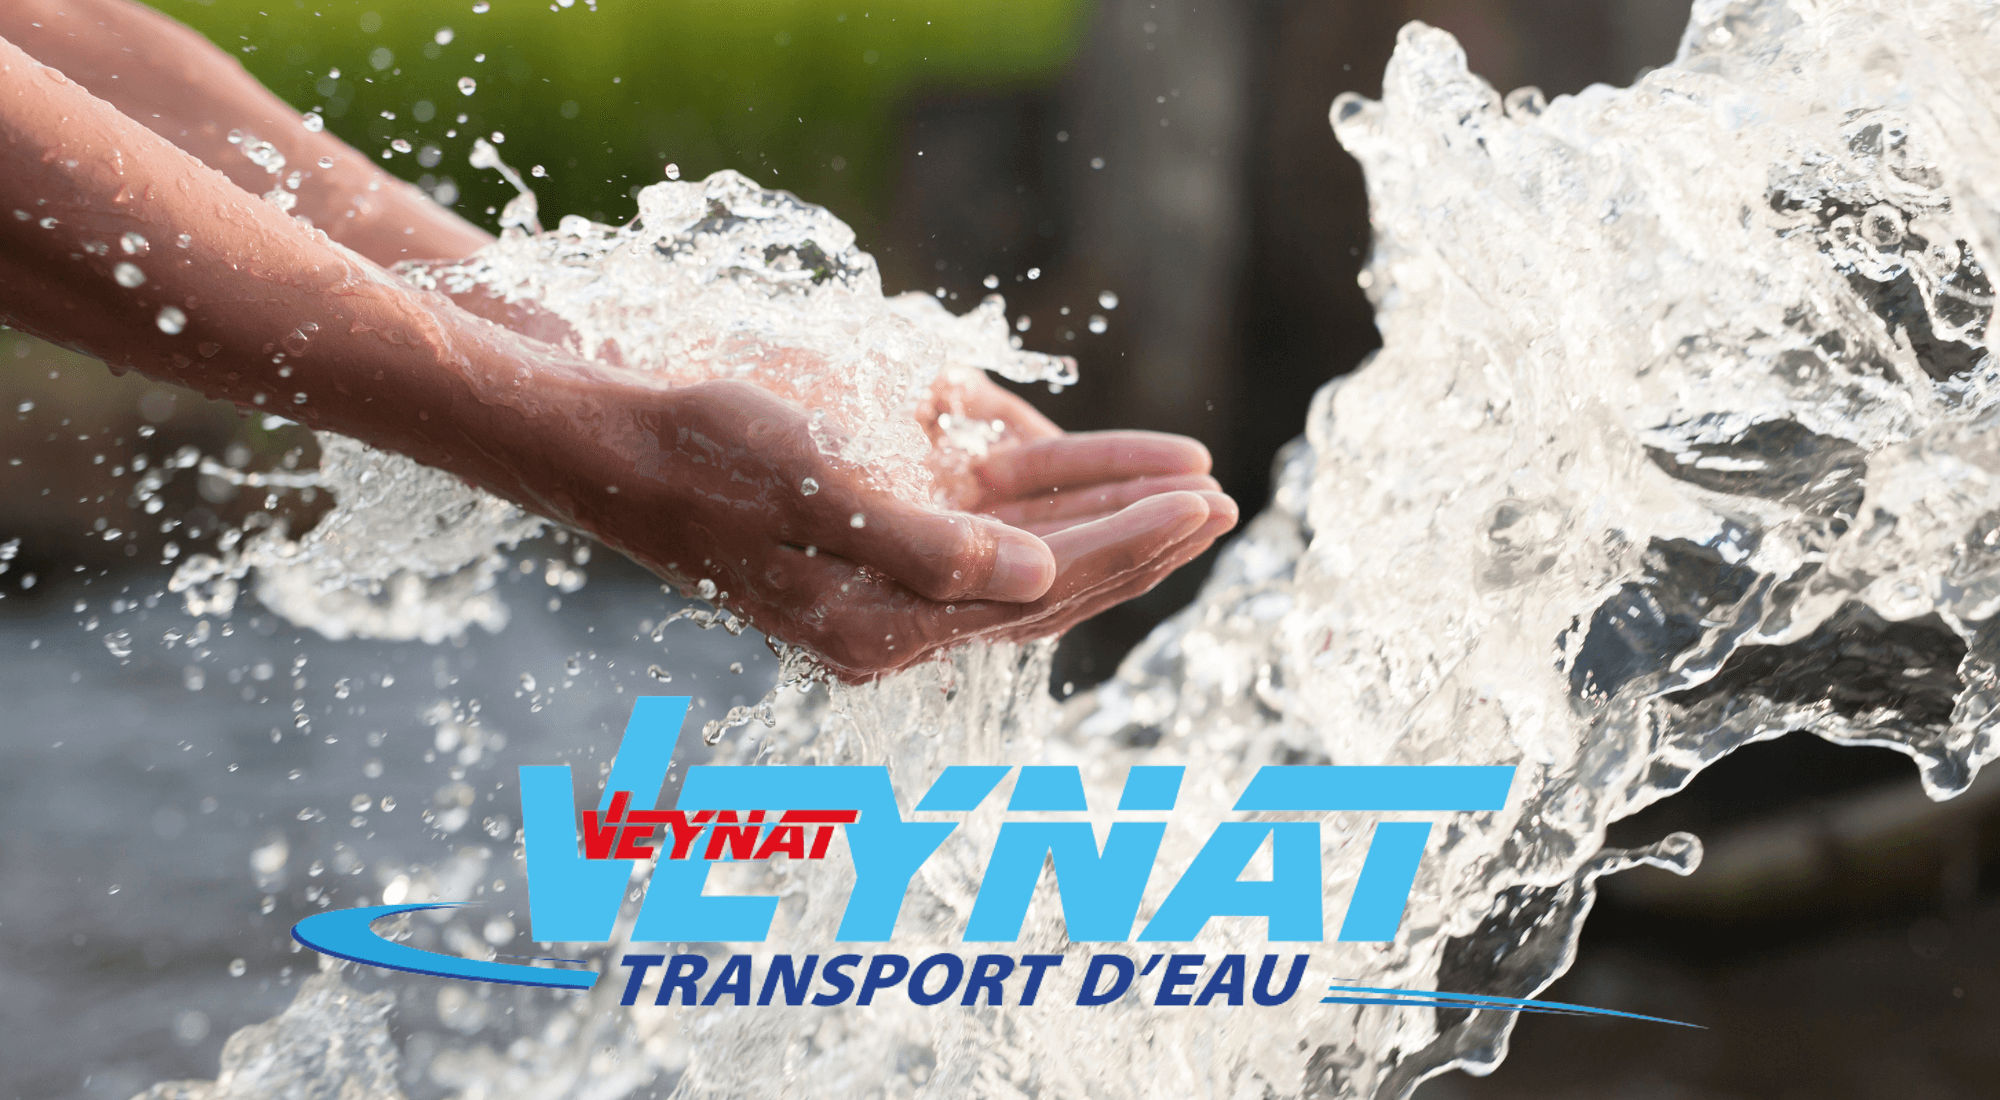 A GLOBAL SERVICE OFFER FOR WATER PRESERVATION AND DISTRIBUTION - Transports Veynat